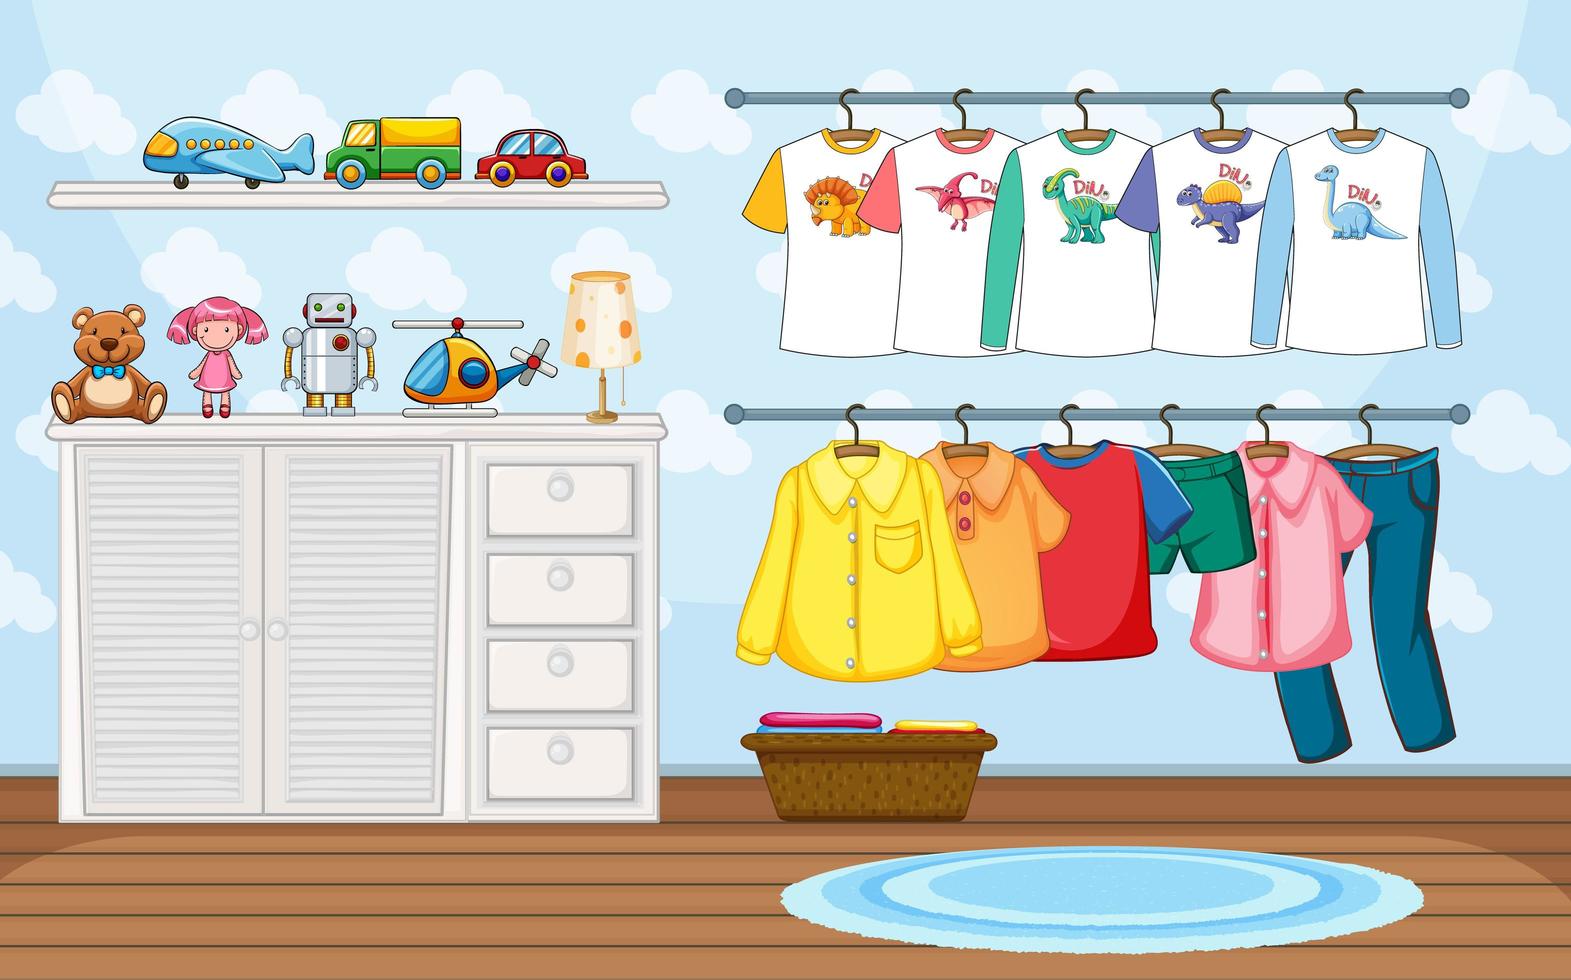 Children clothes on a clothesline with many toys in the room scene vector